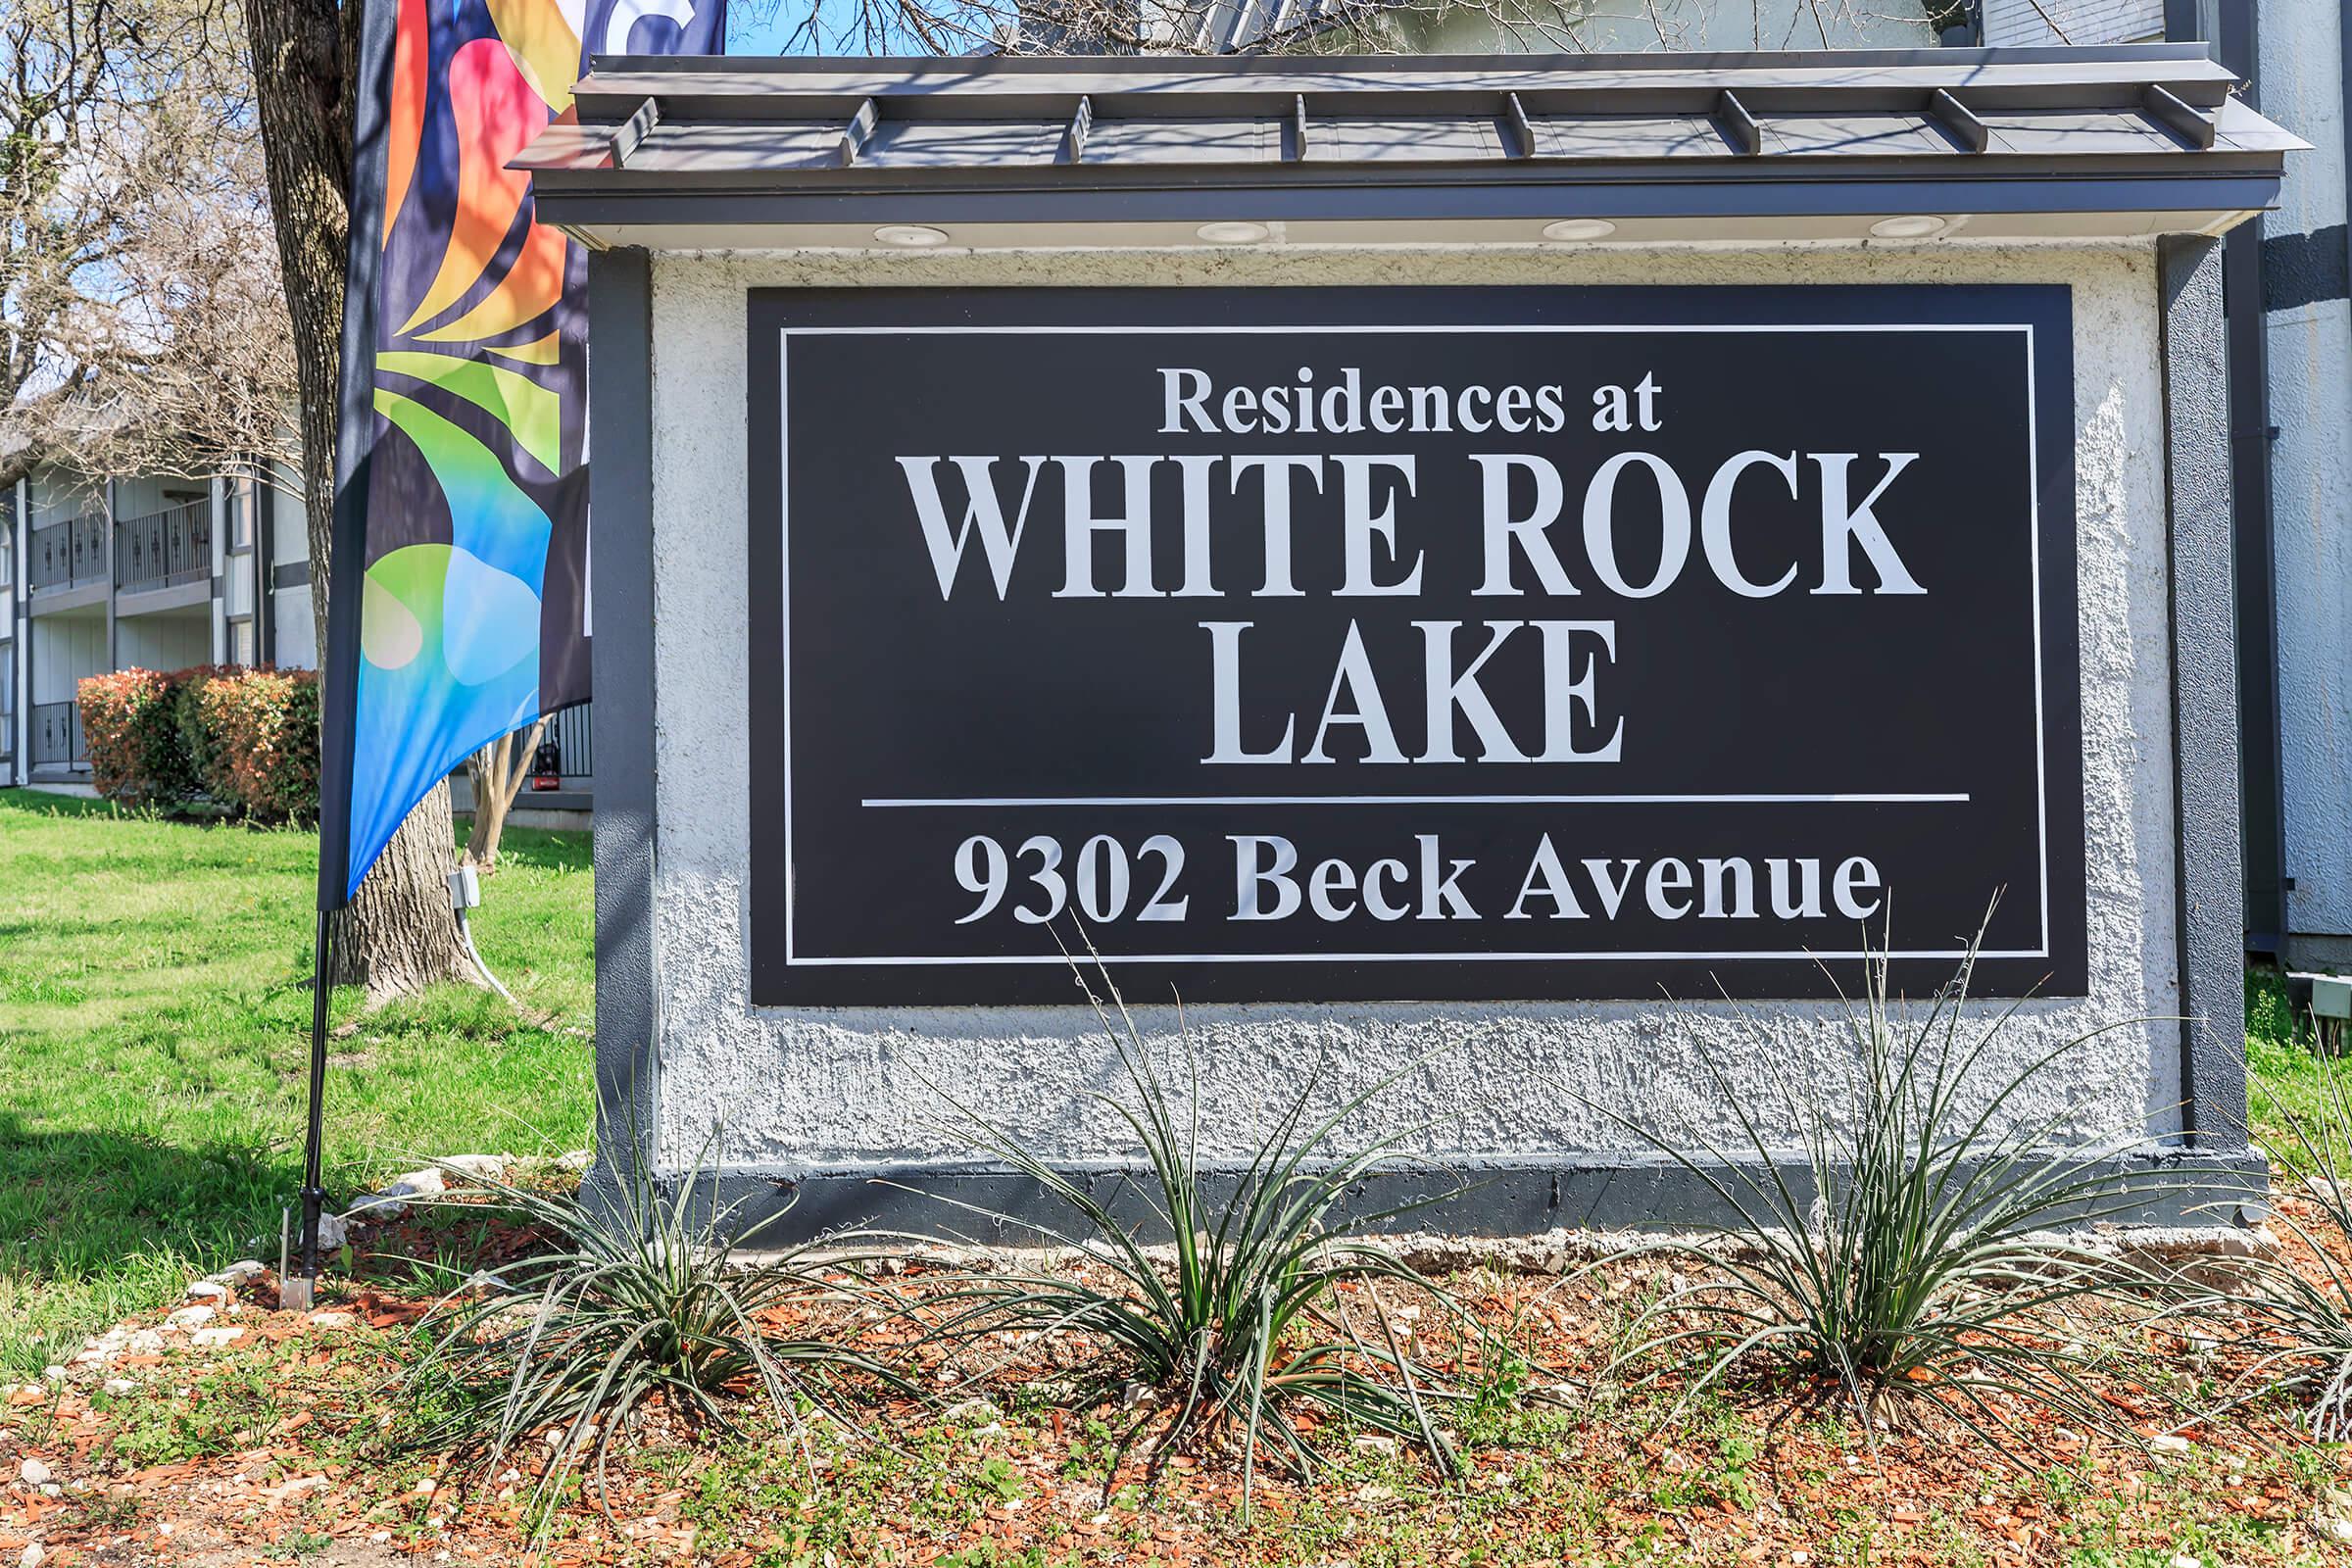 CALL THE RESIDENCES AT WHITE ROCK LAKE TODAY